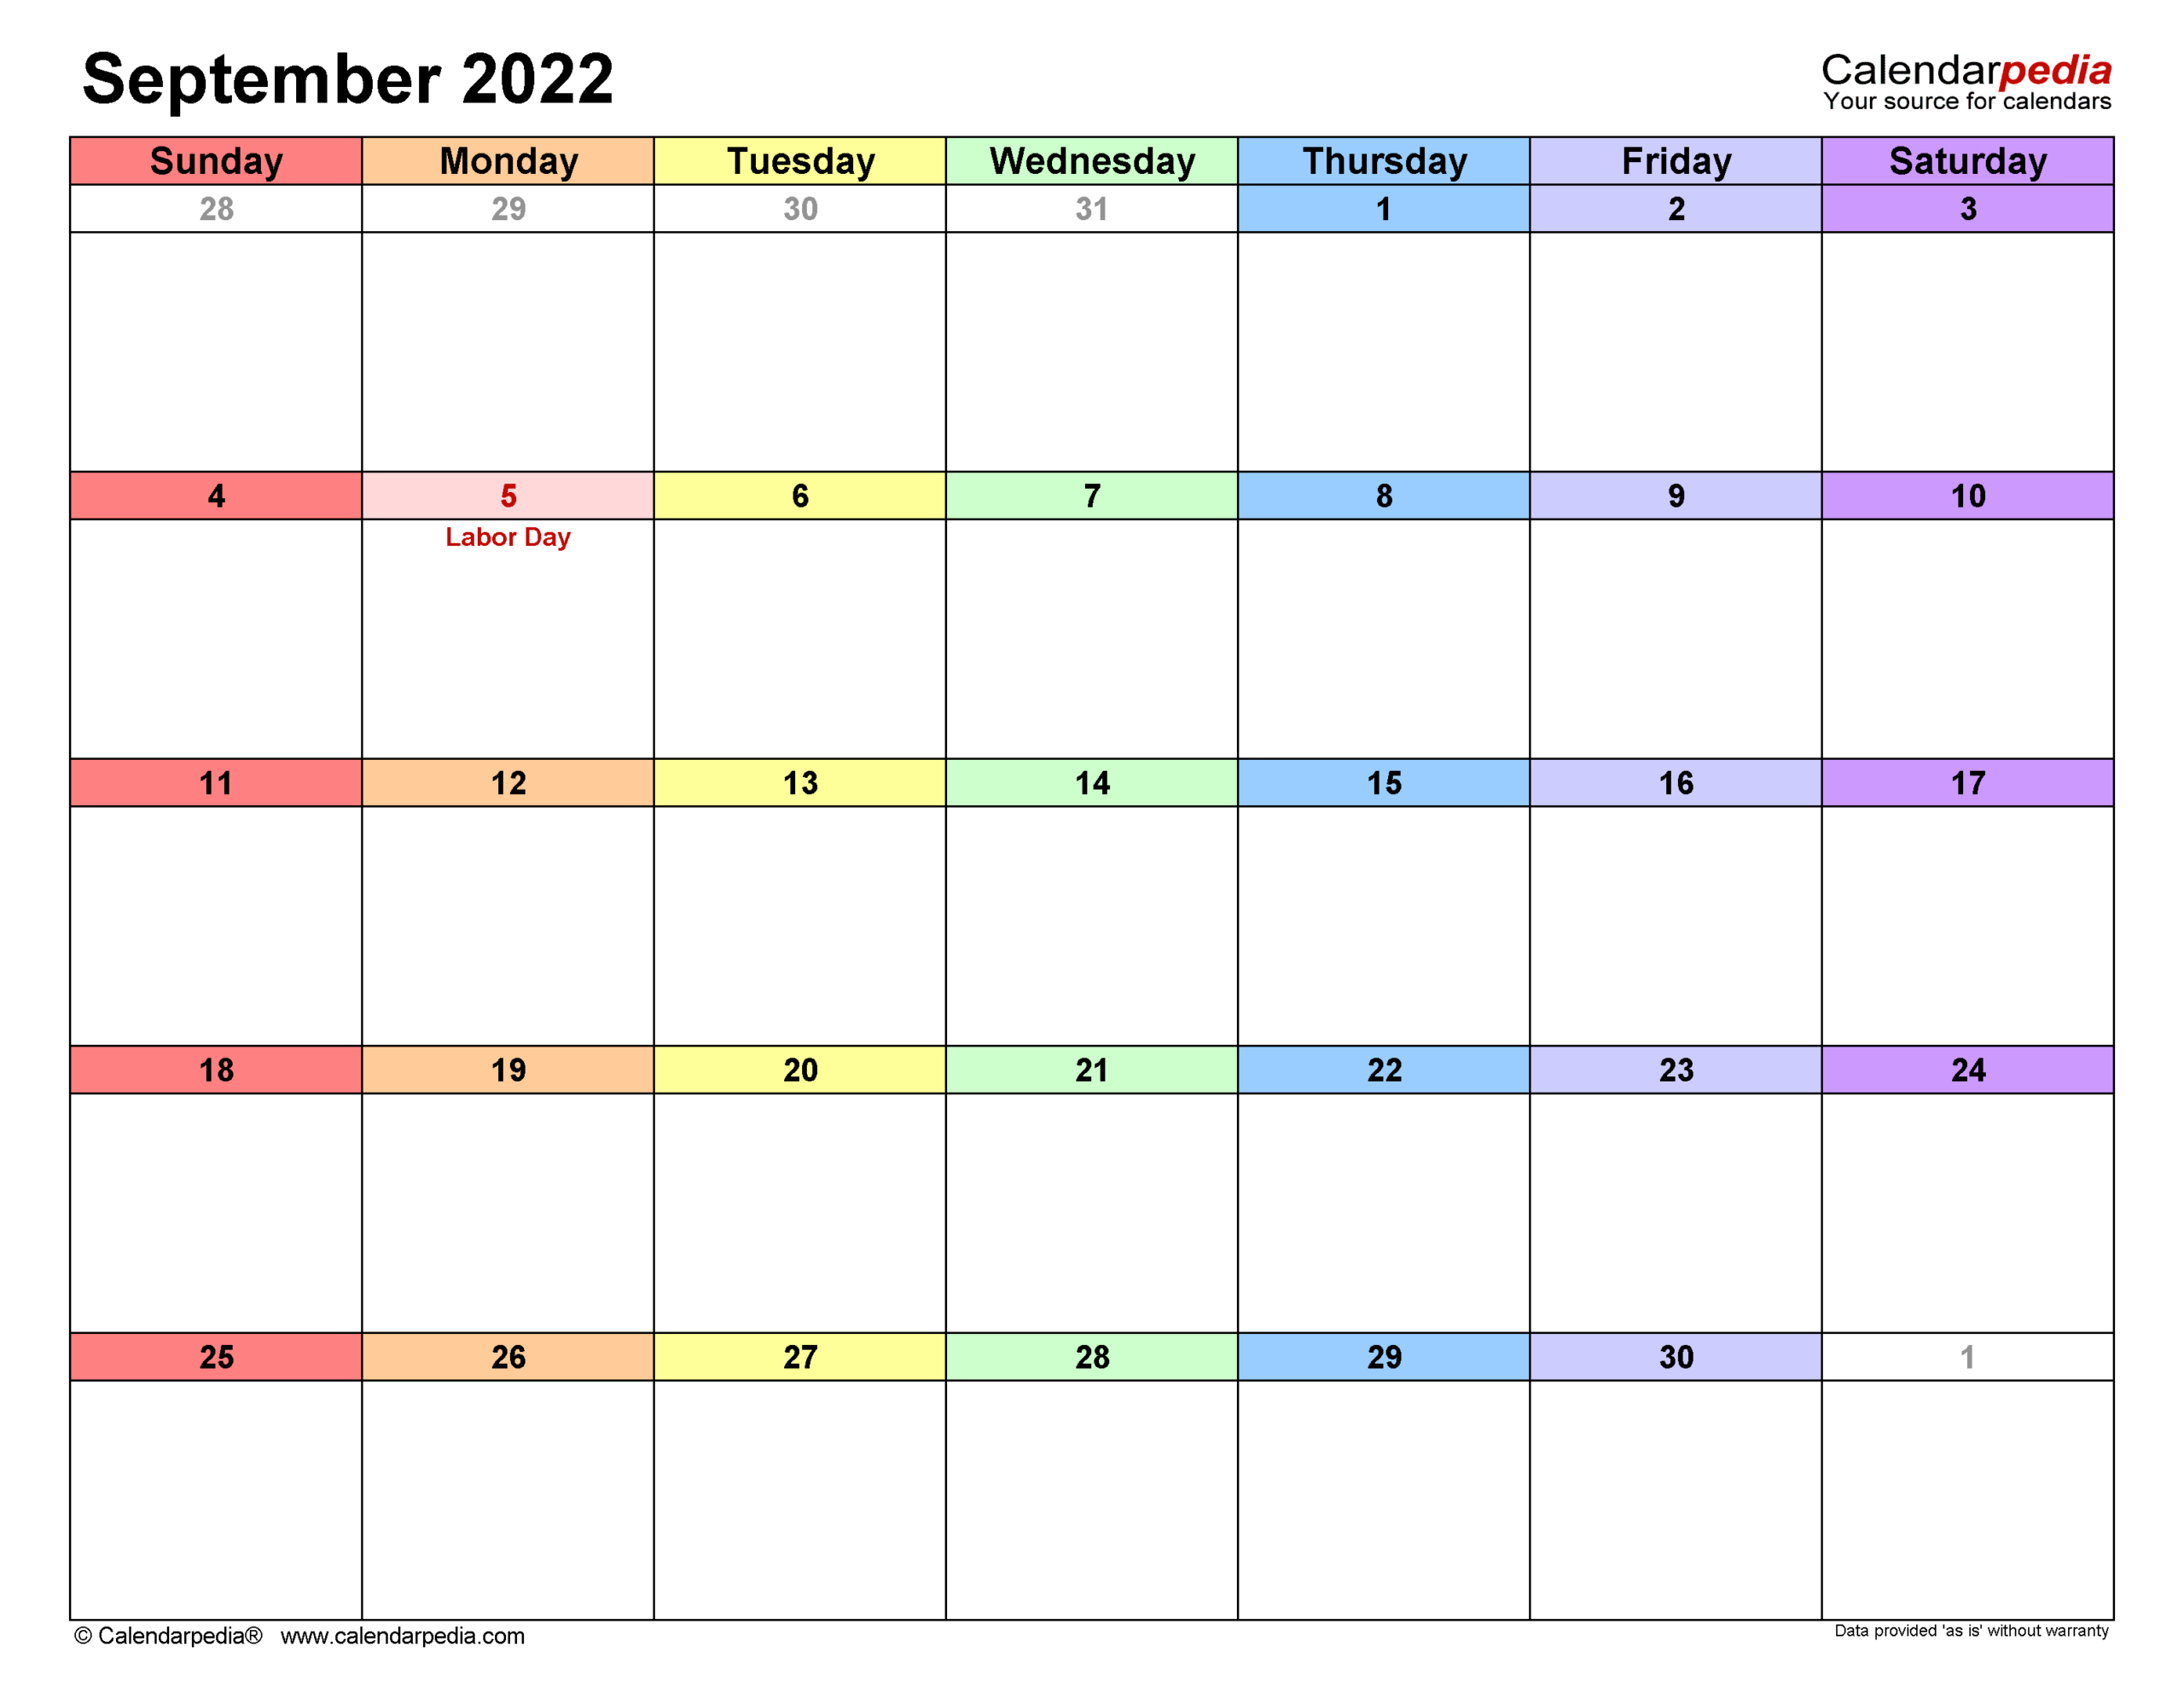 September 2022 Calendar | Templates For Word, Excel And Pdf